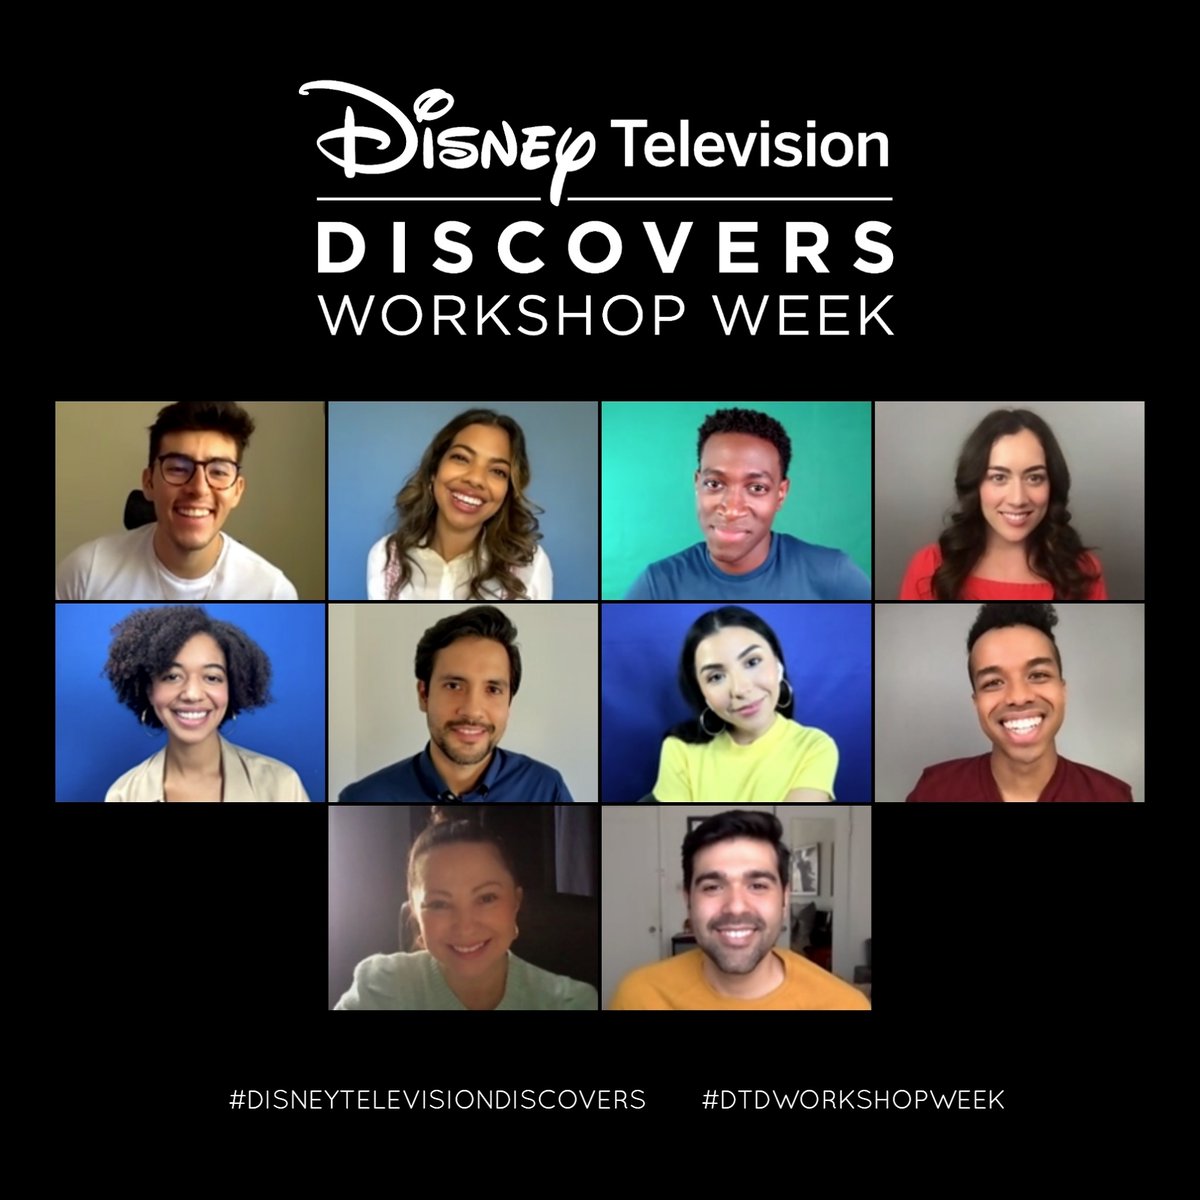 Our 2021 Disney Television Discovers: Workshop Week in Los Angeles continues with actors of Nosotros. Thanks for joining remotely! #DisneyTelevisionDiscovers #DTDWorkshopWeek